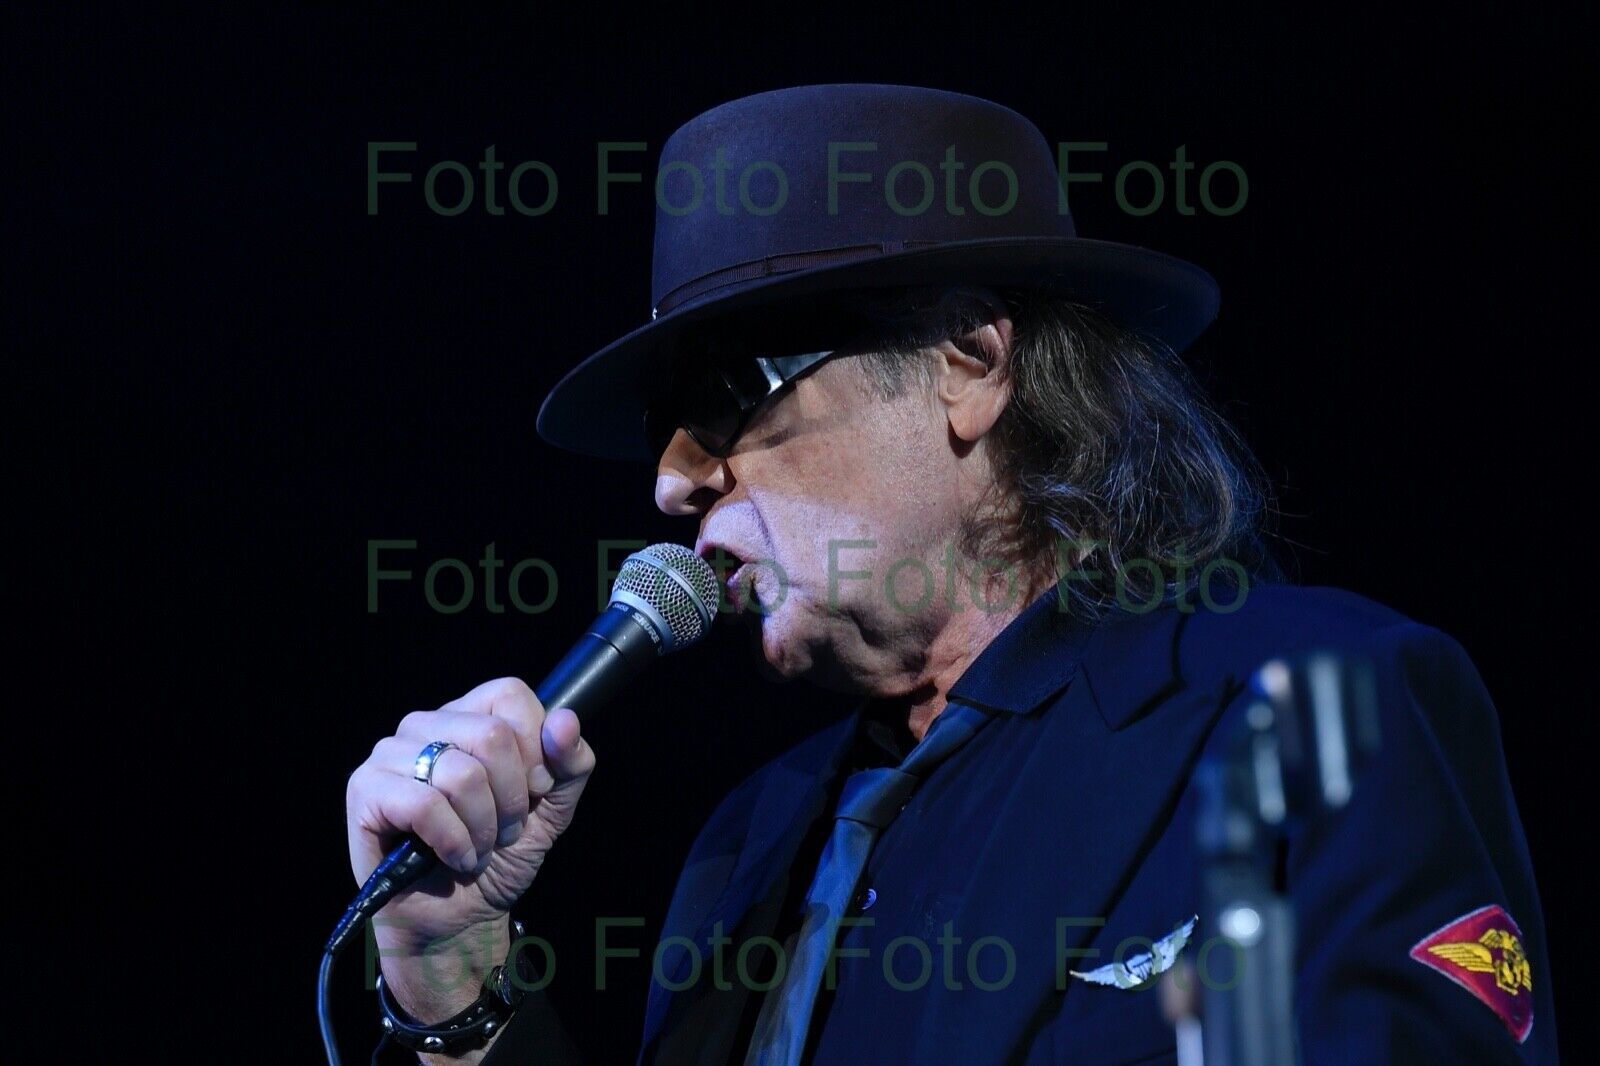 Udo Lindenberg Rock Music Painter Photo Poster painting 20 X 30 CM Without Autograph (Be-45